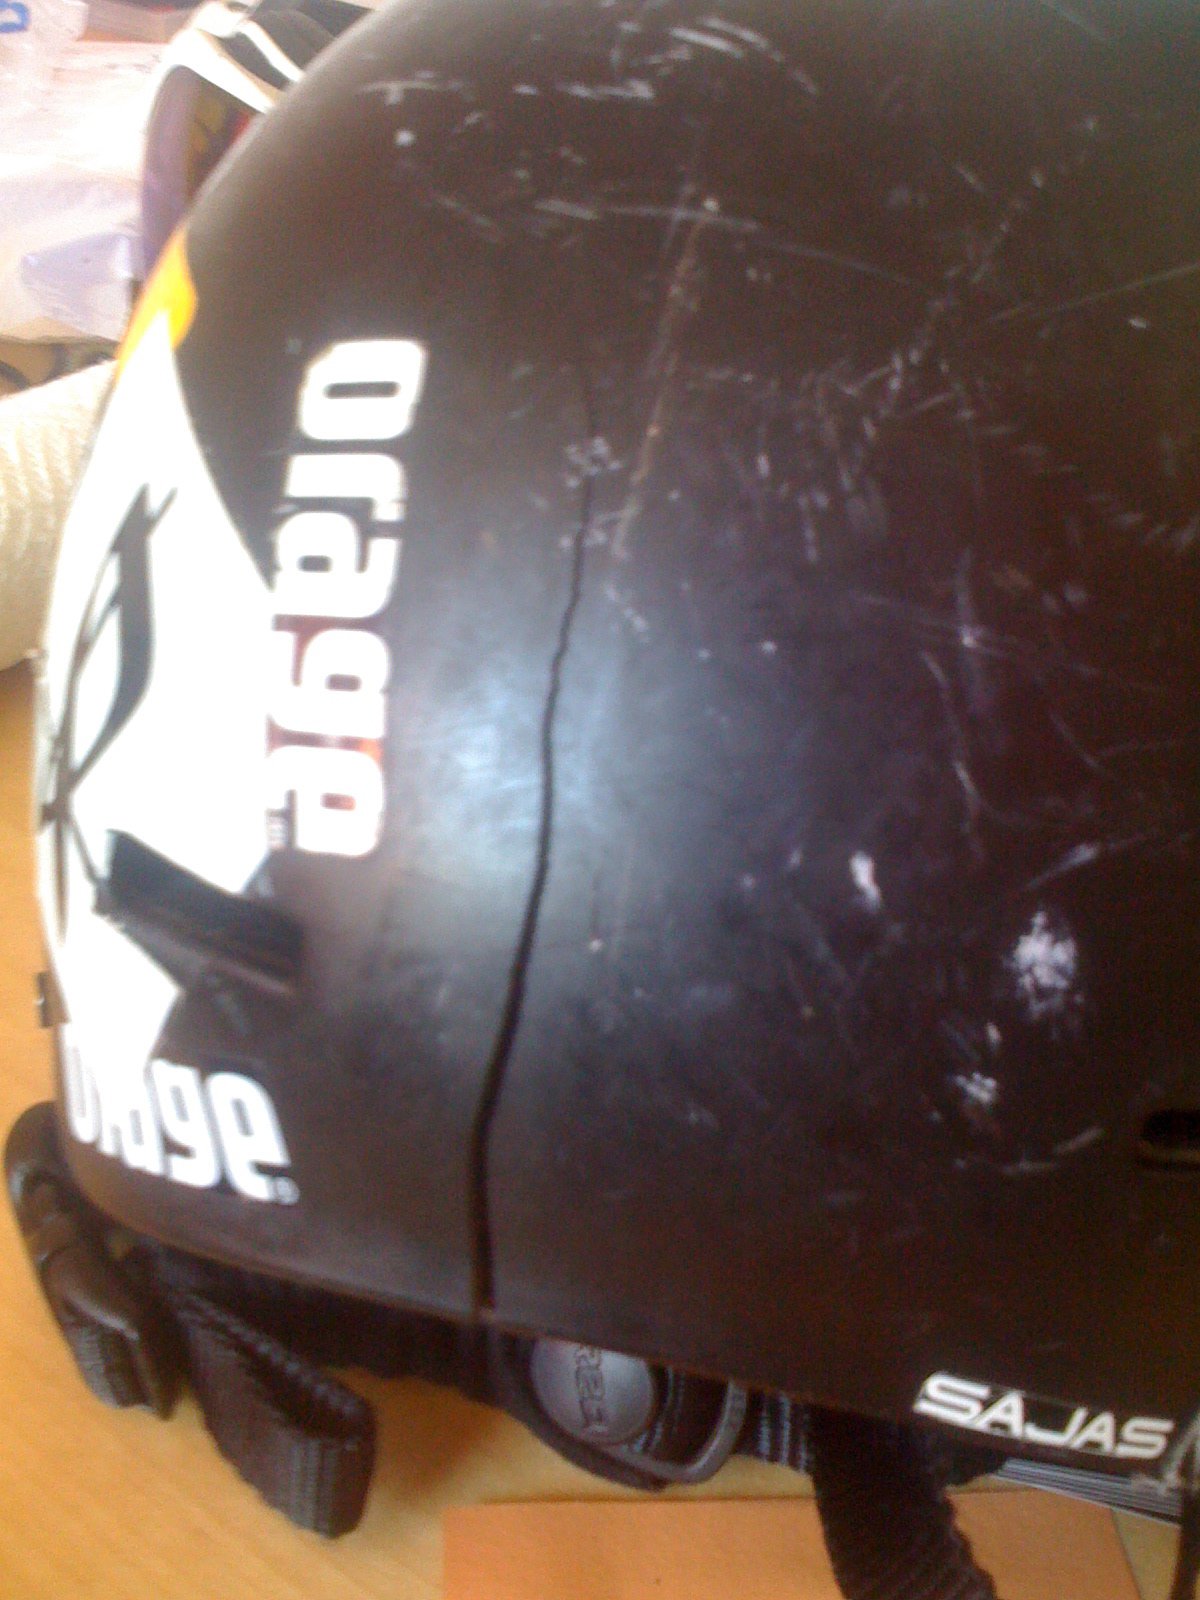 This is why you wear a helmet